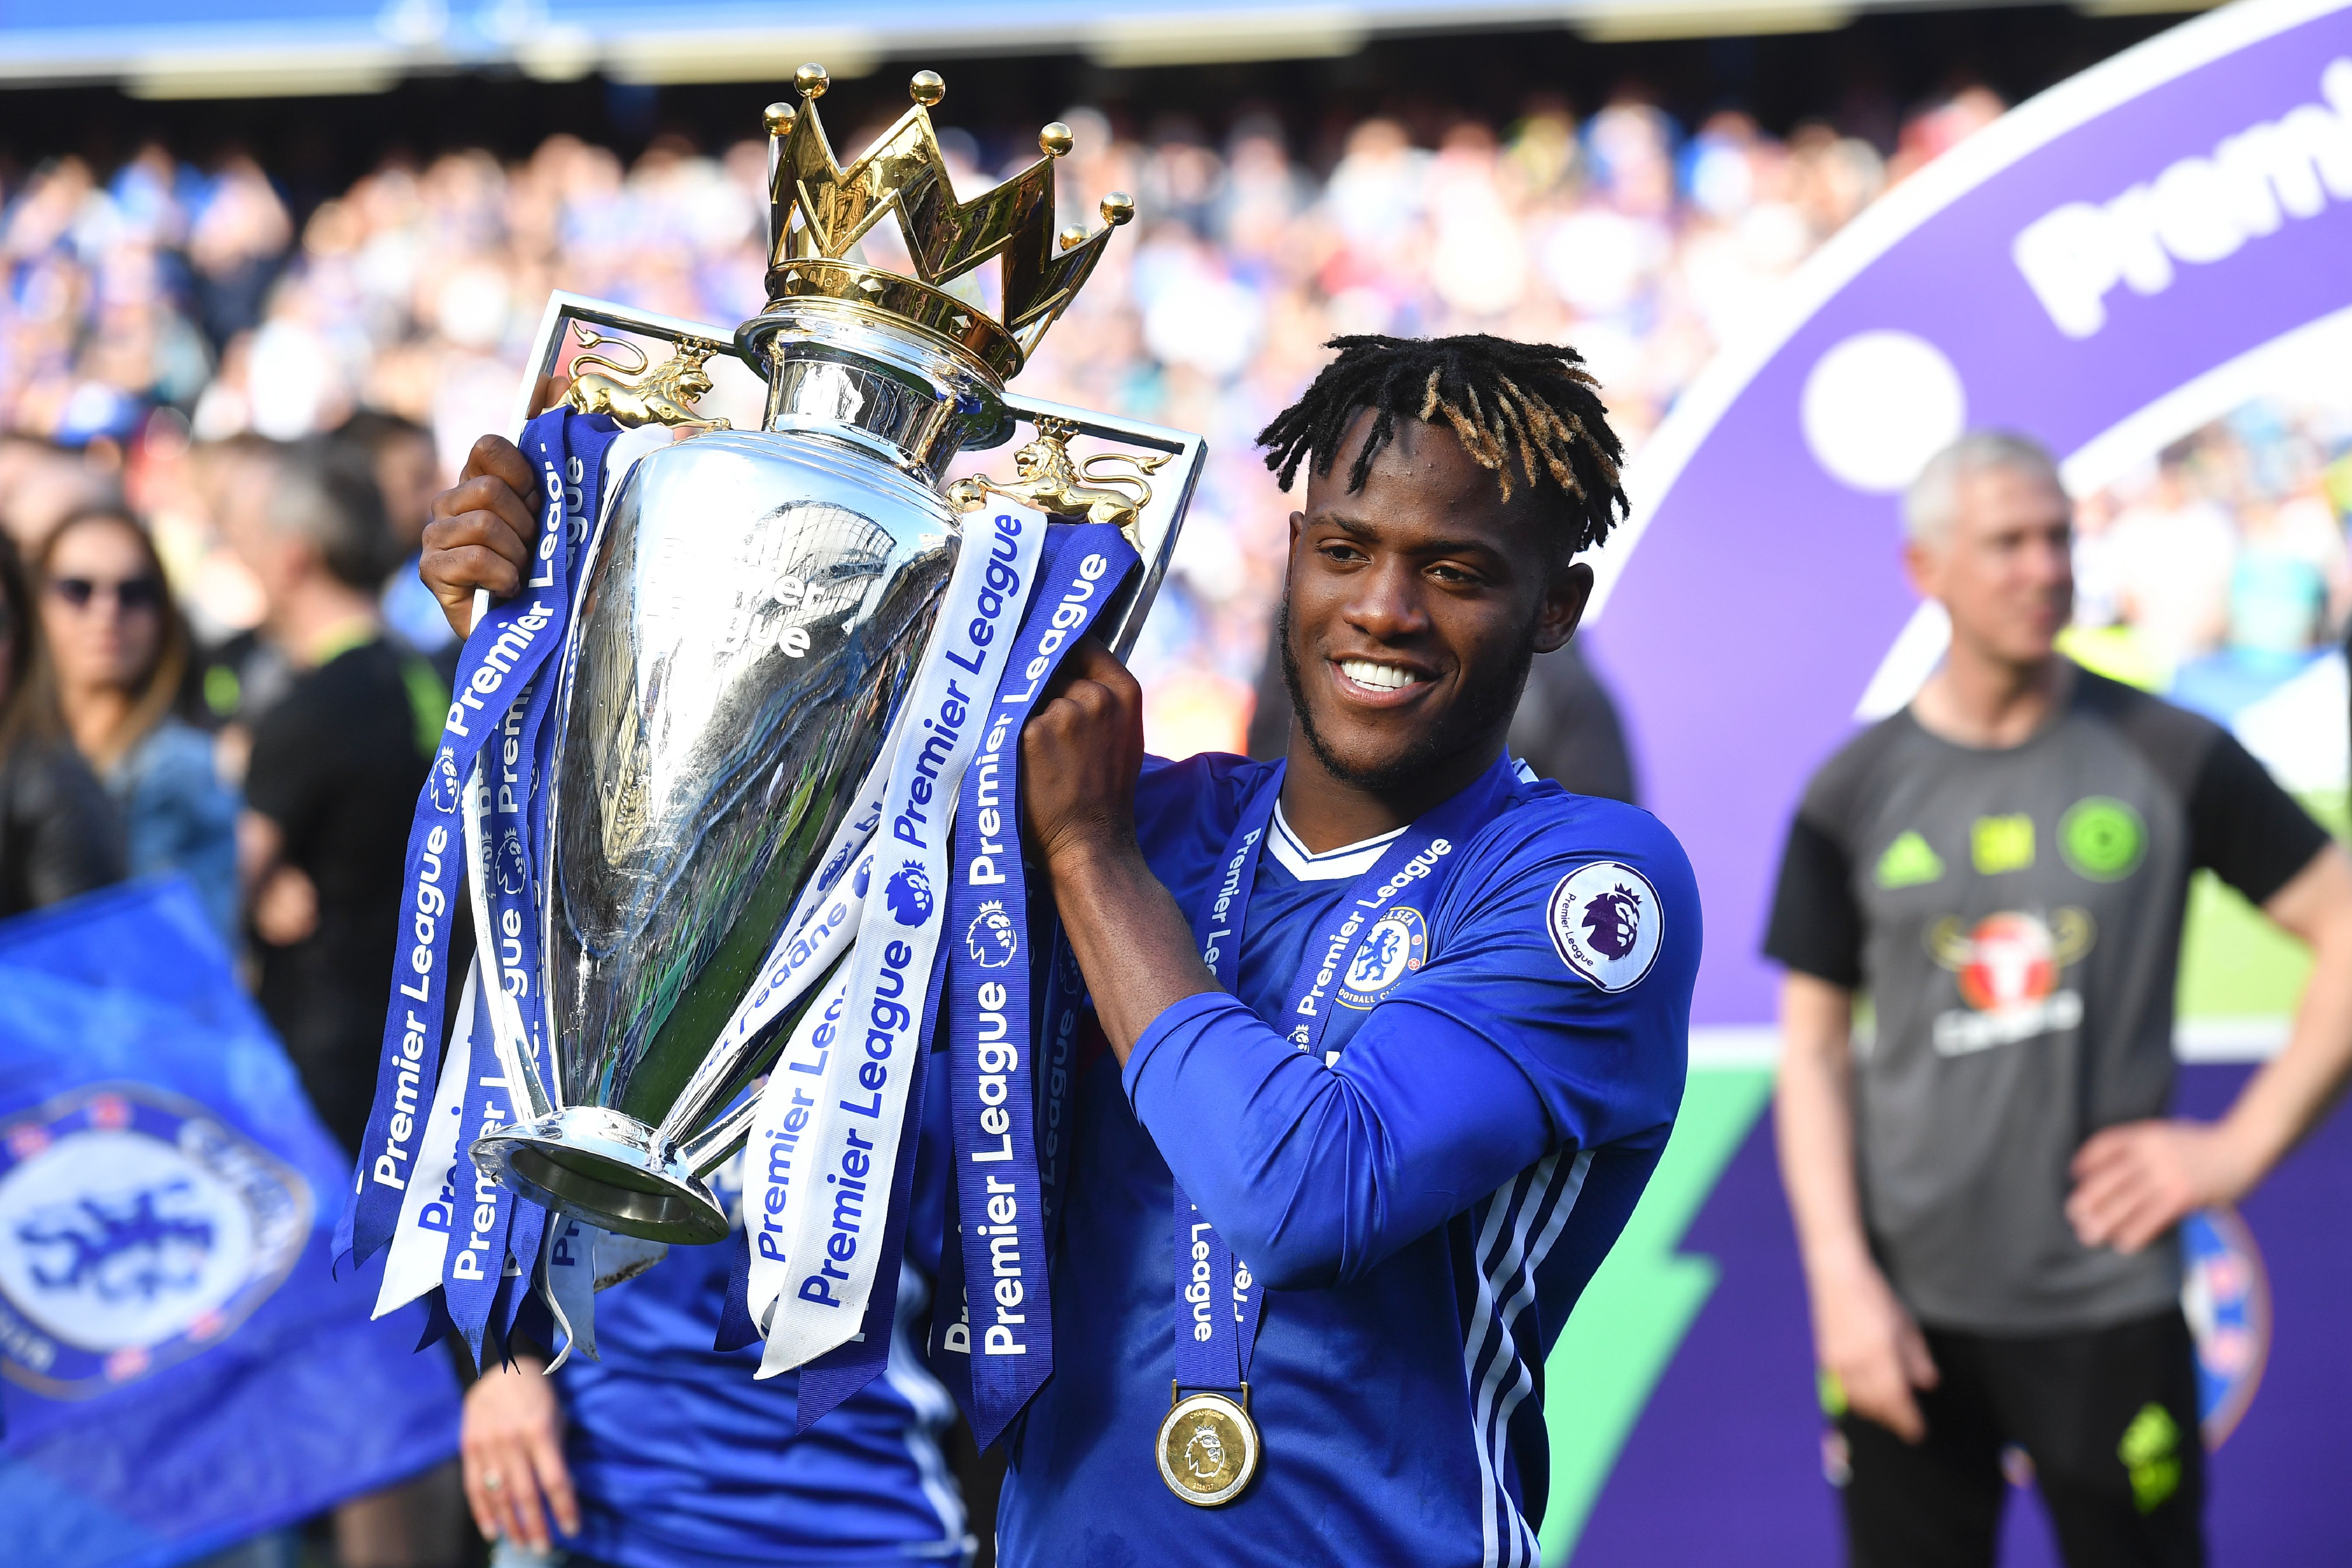 Chelsea's Belgian striker Michy Batshuayi poses with the English Premier League trophy, as players celebrate their league title win at the end of the Premier League football match between Chelsea and Sunderland at Stamford Bridge in London on May 21, 2017. Chelsea's extended victory parade reached a climax with the trophy presentation on May 21, 2017 after being crowned Premier League champions with two games to go. / AFP PHOTO / Ben STANSALL / RESTRICTED TO EDITORIAL USE. No use with unauthorized audio, video, data, fixture lists, club/league logos or 'live' services. Online in-match use limited to 75 images, no video emulation. No use in betting, games or single club/league/player publications. / (Photo credit should read BEN STANSALL/AFP/Getty Images)